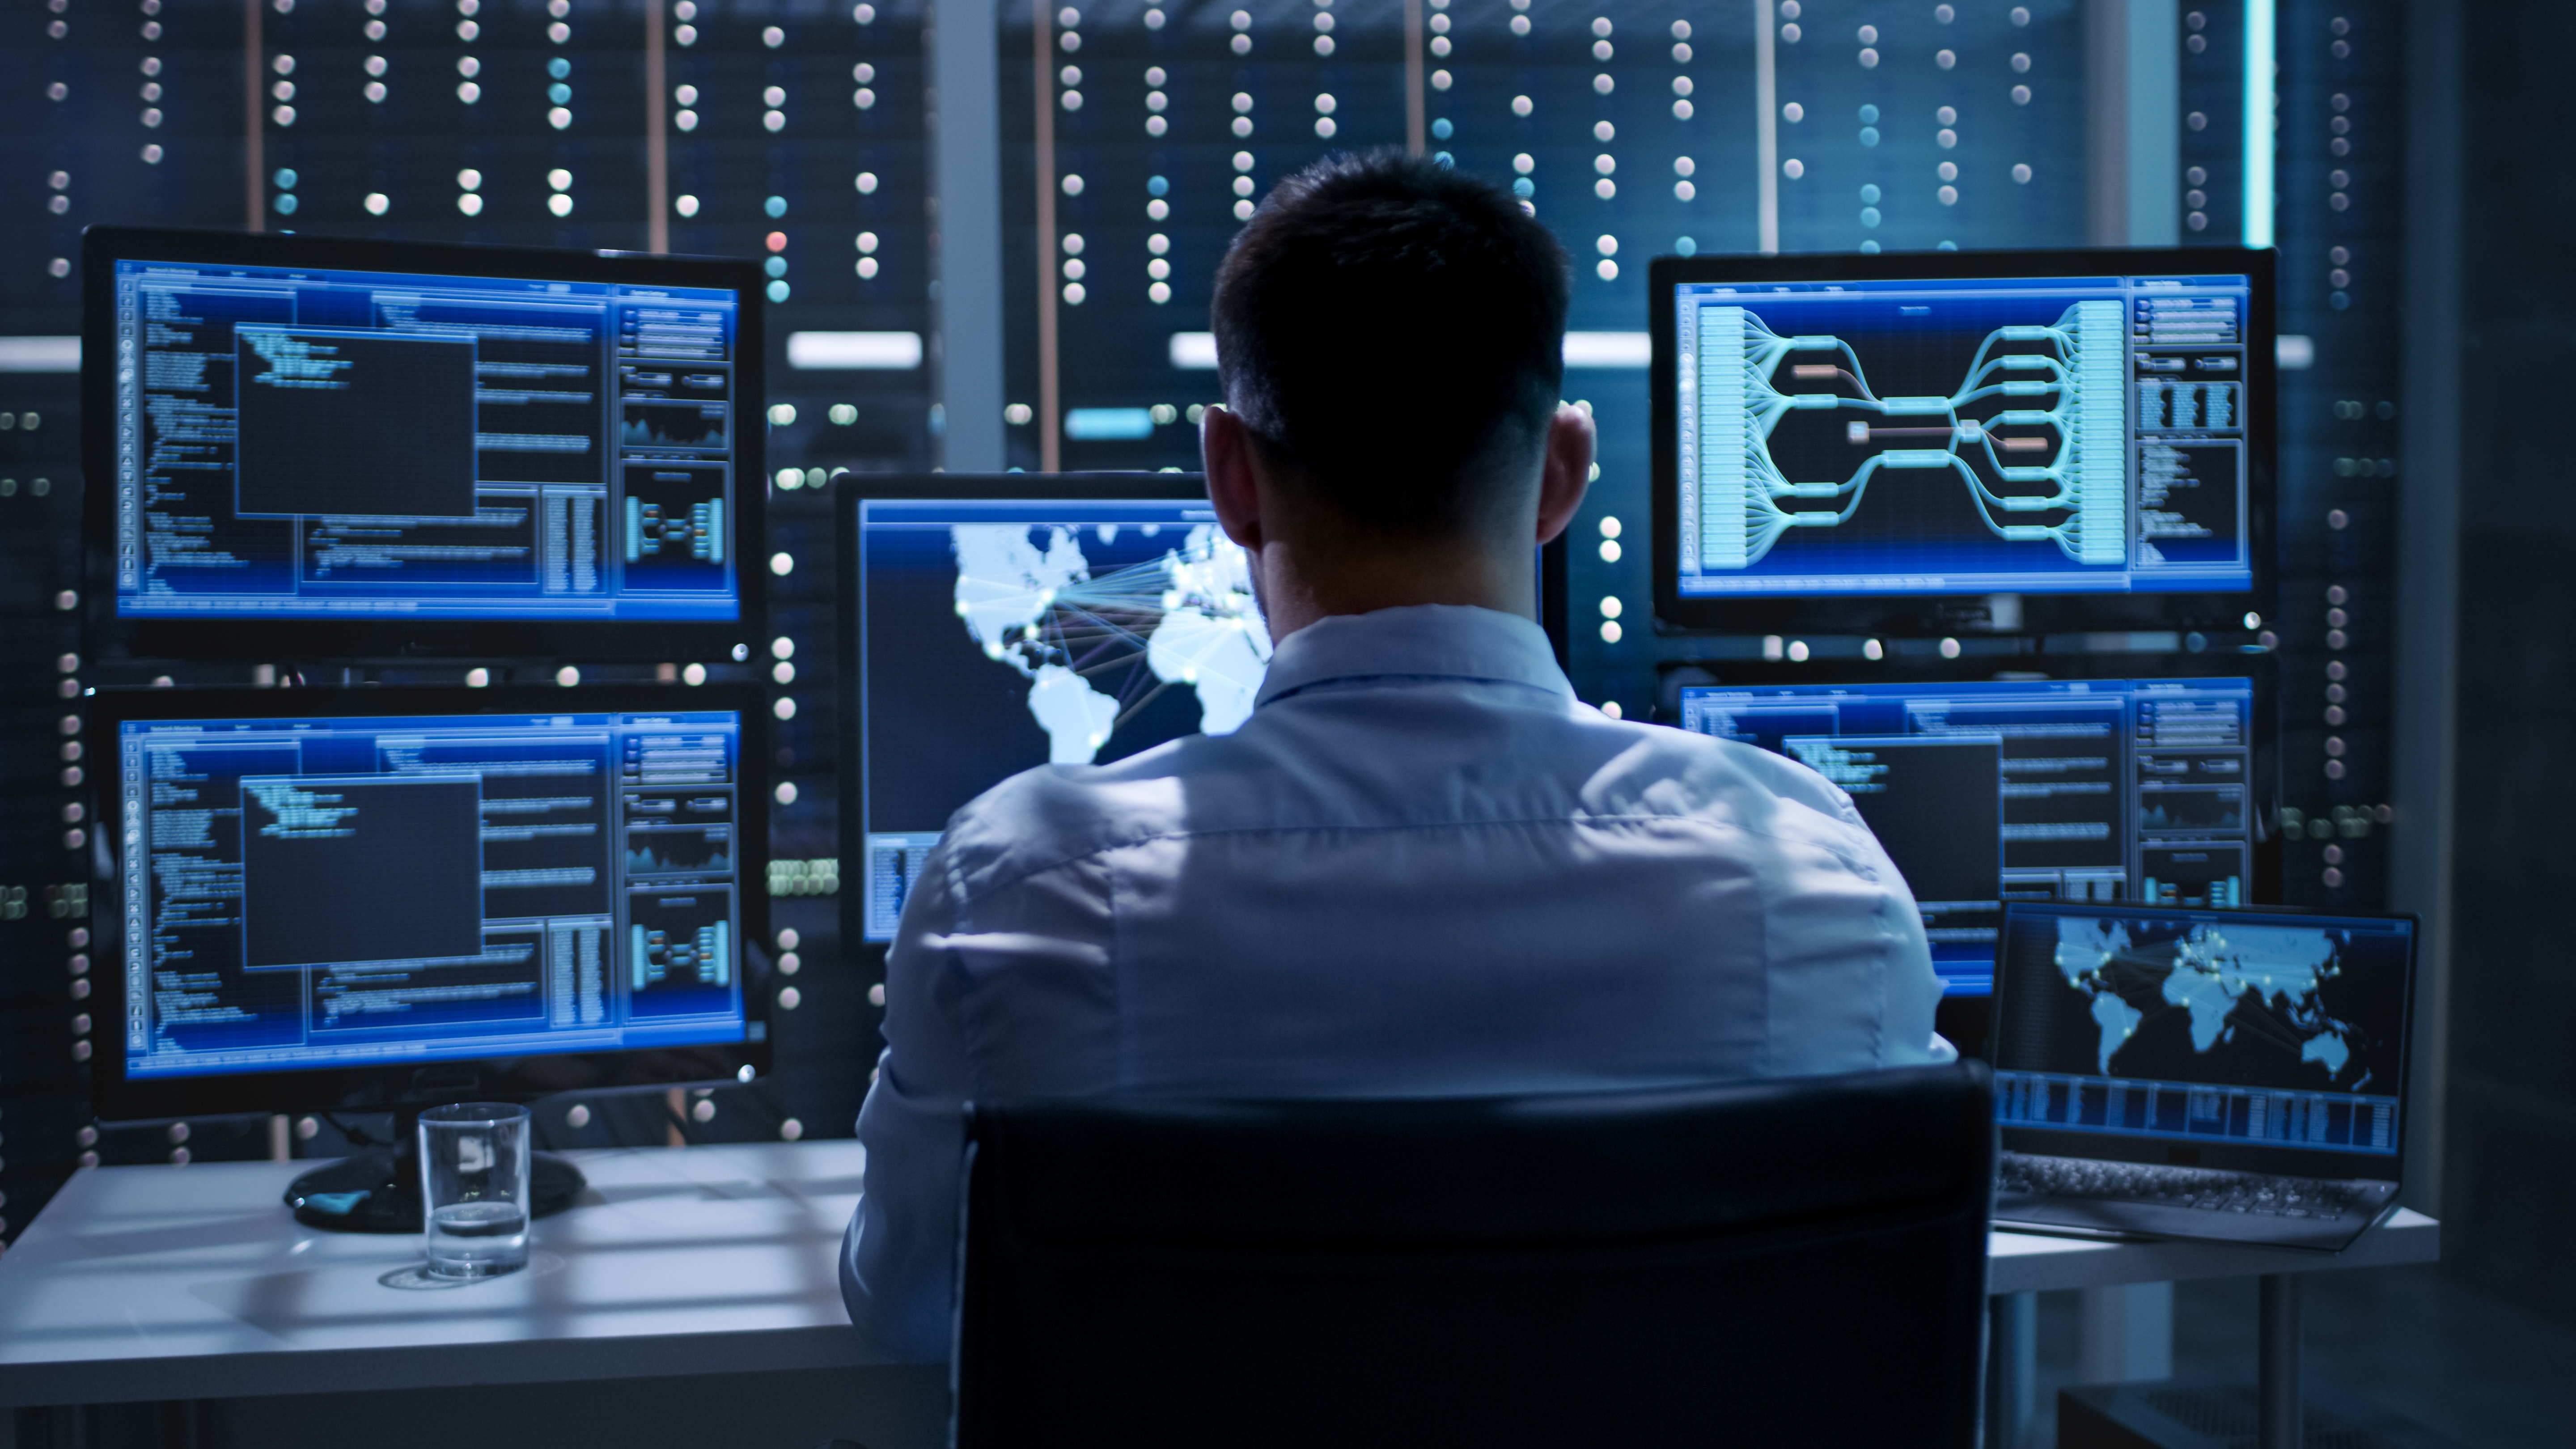 An employee sitting in front of multiple computer screens, implementing network segmentation best practices for defense manufacturing companies